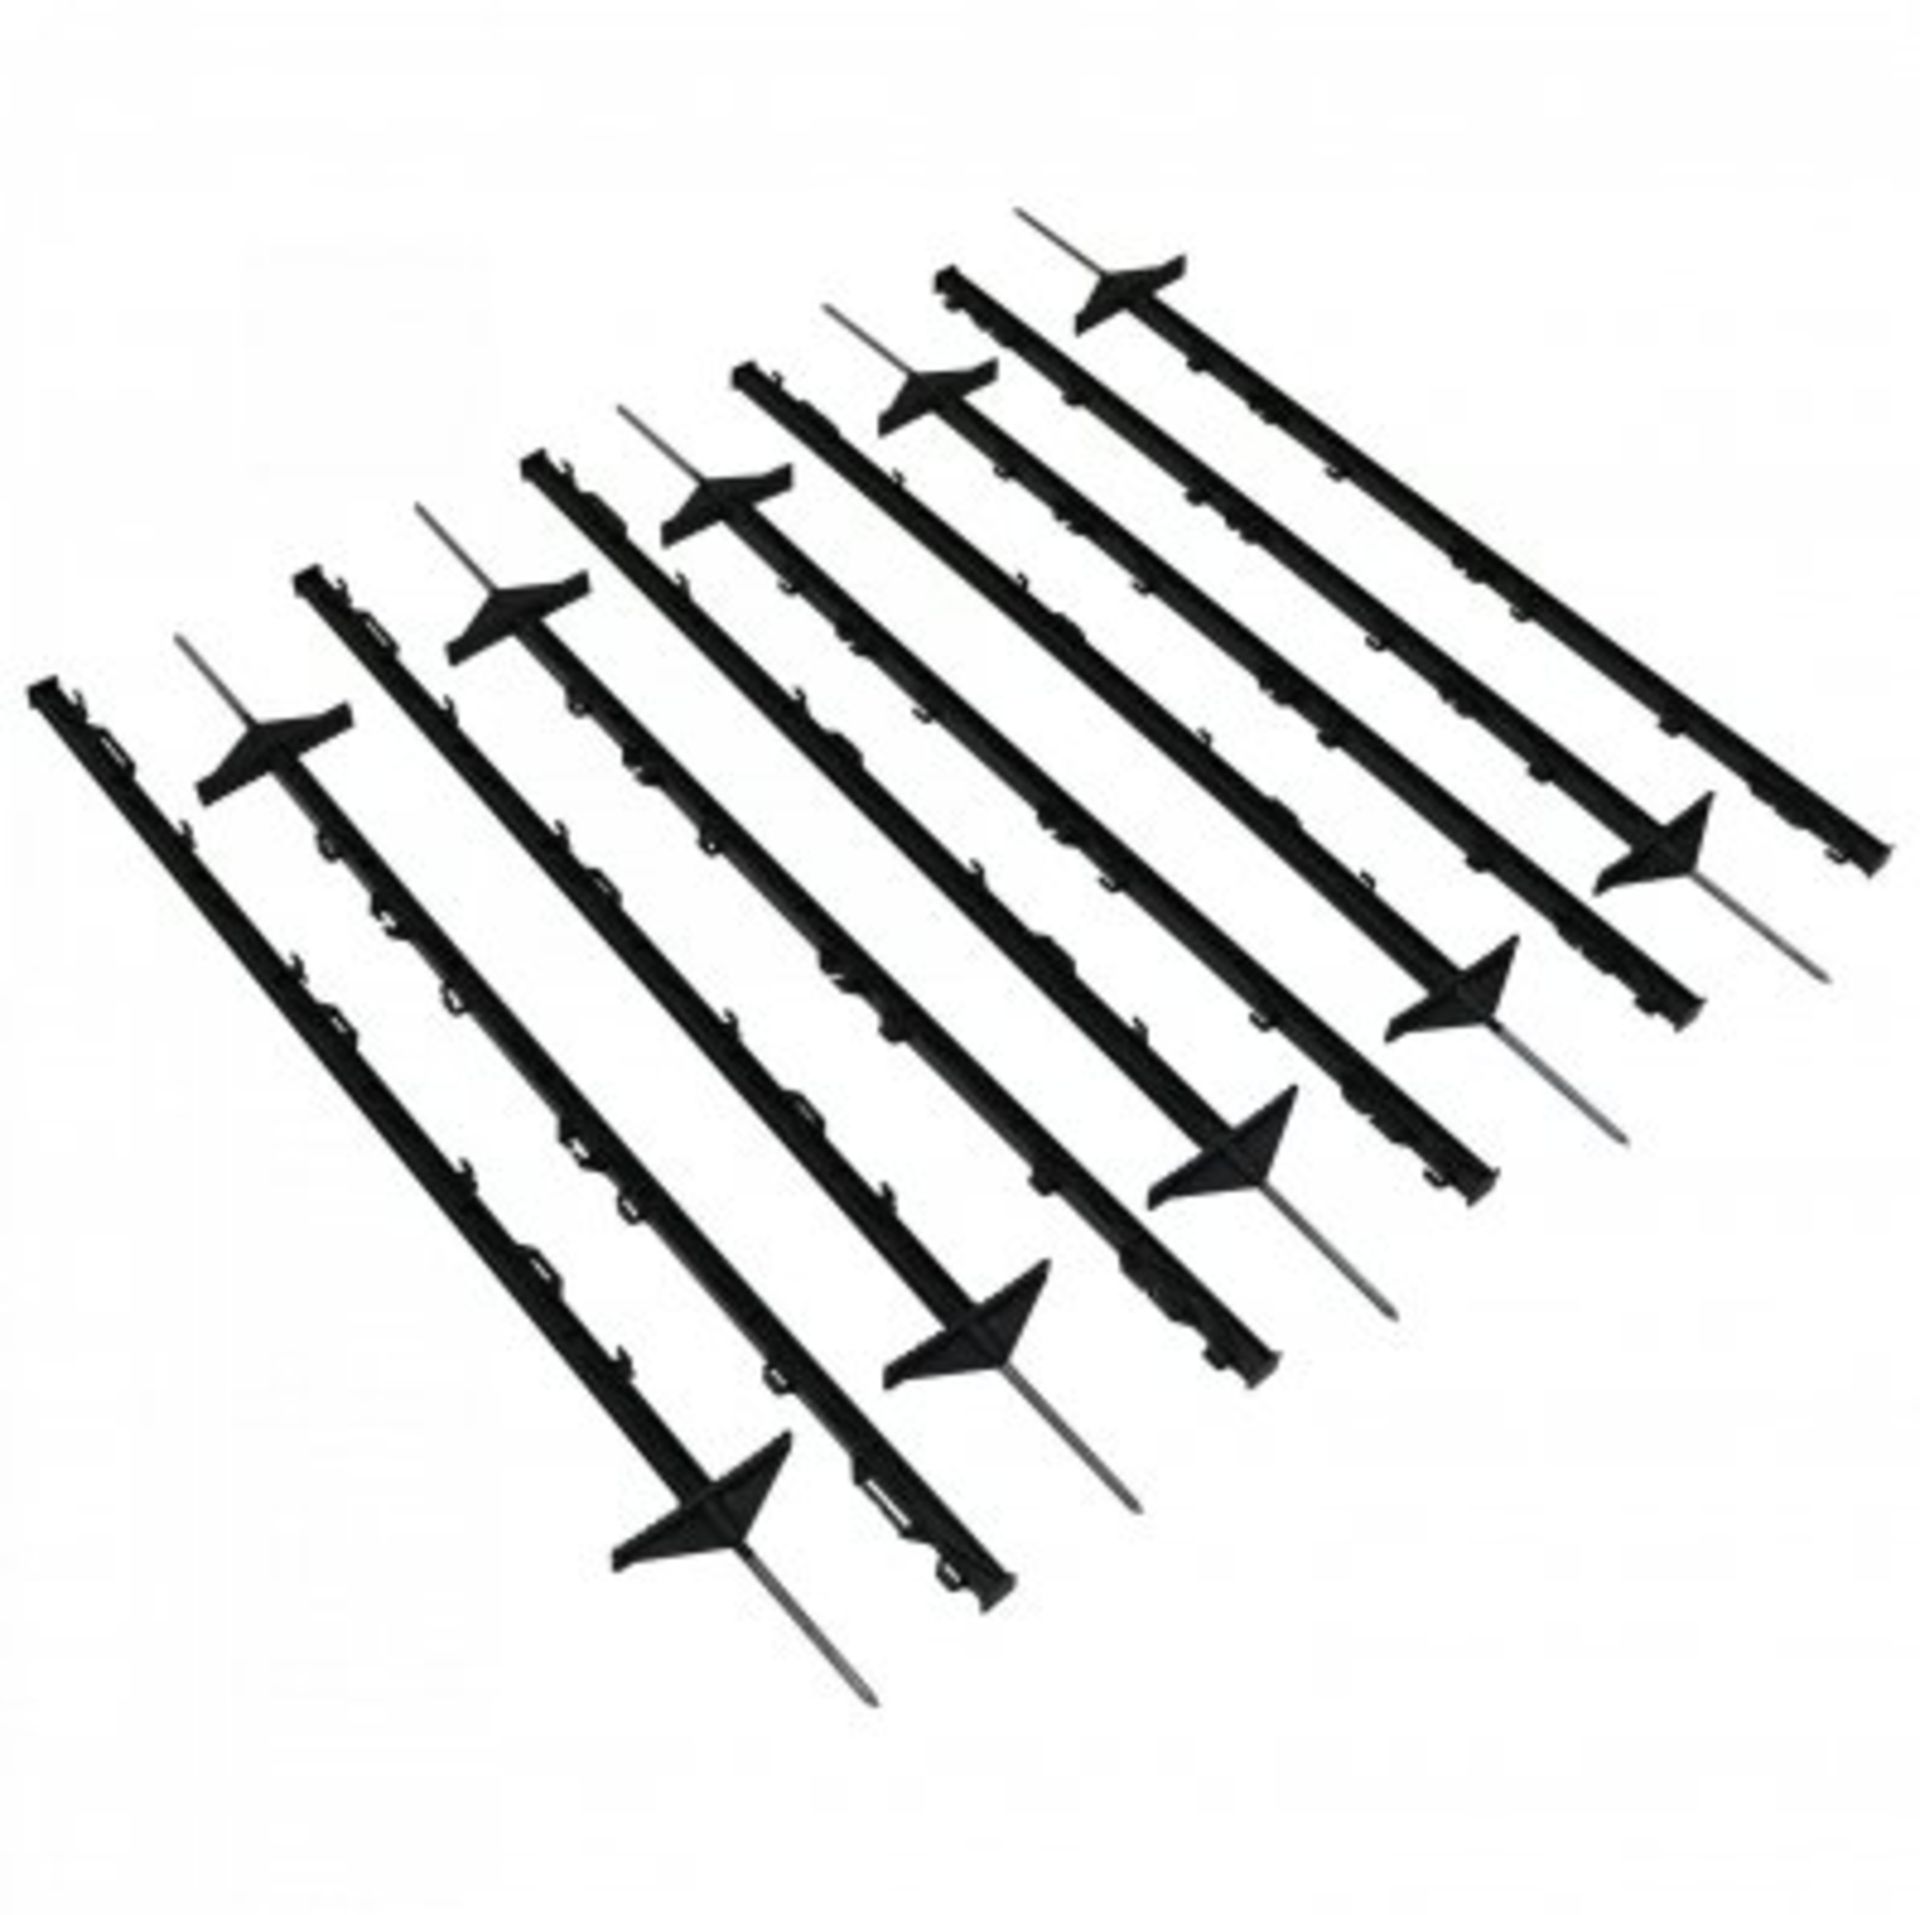 (RL81) 1m Black Plastic Electric Fencing Pins Posts Stakes Pack of 10 The fencing pins are...